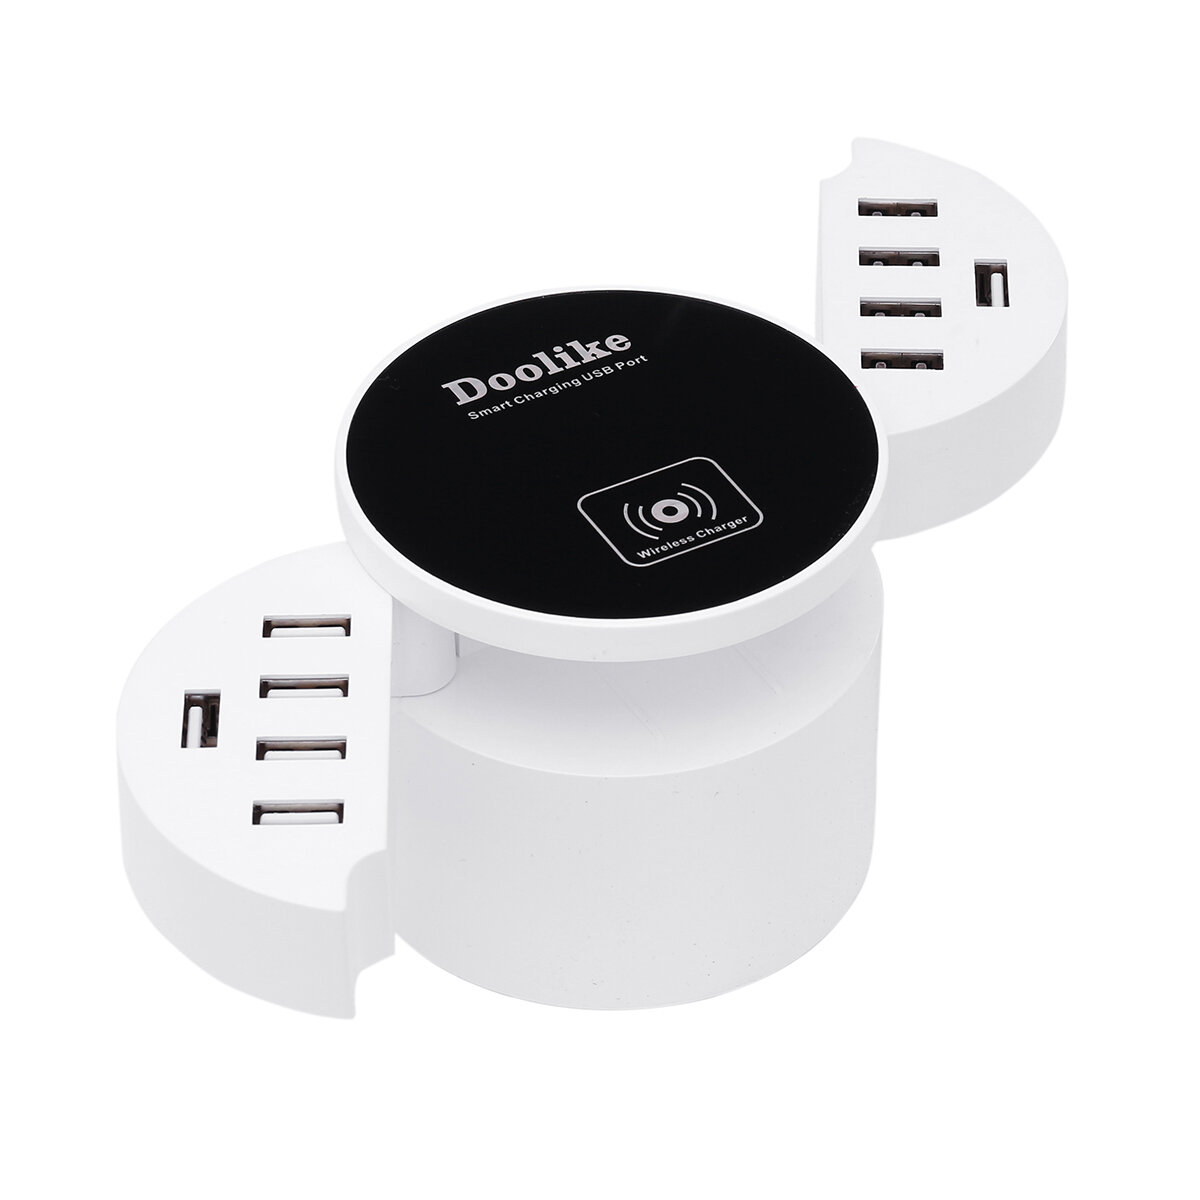 Bakeey DL-CDA 16W 10Ports USB Charger with Wireless Charger For iPhone X 8 / 8Plus Samsung S8 m